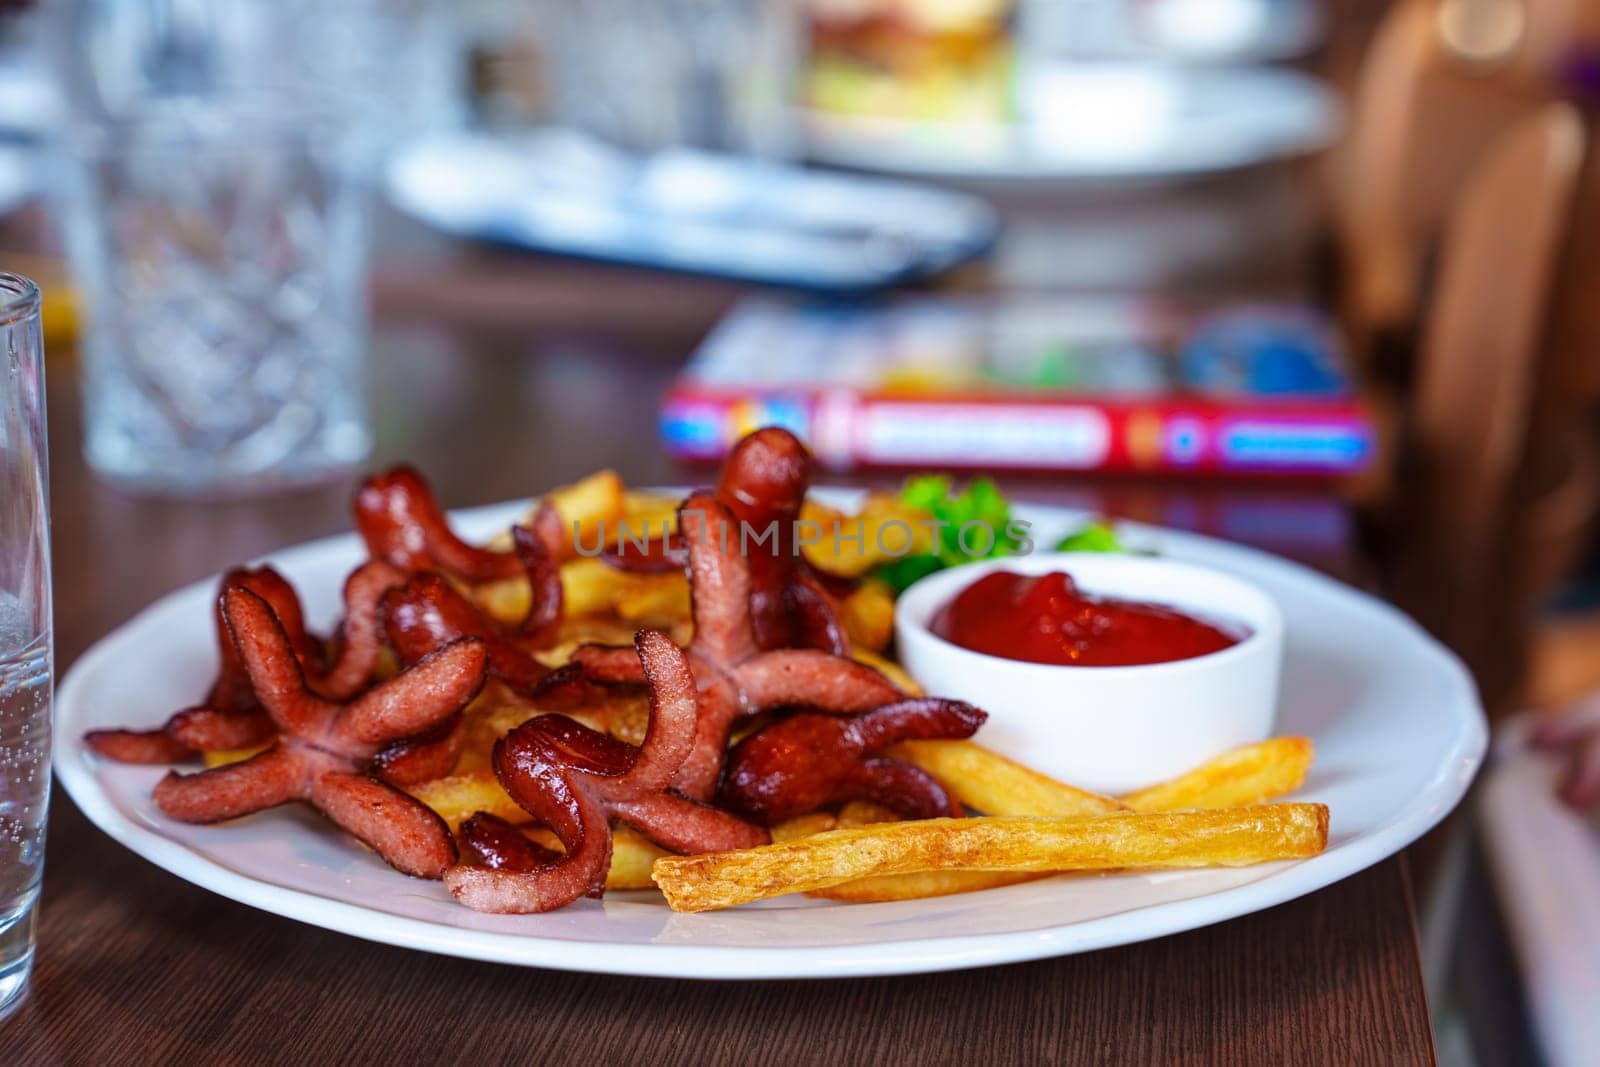 Delicious Children's Menu with Sausages, French Fries, and Ketchup in a Restaurant by PhotoTime